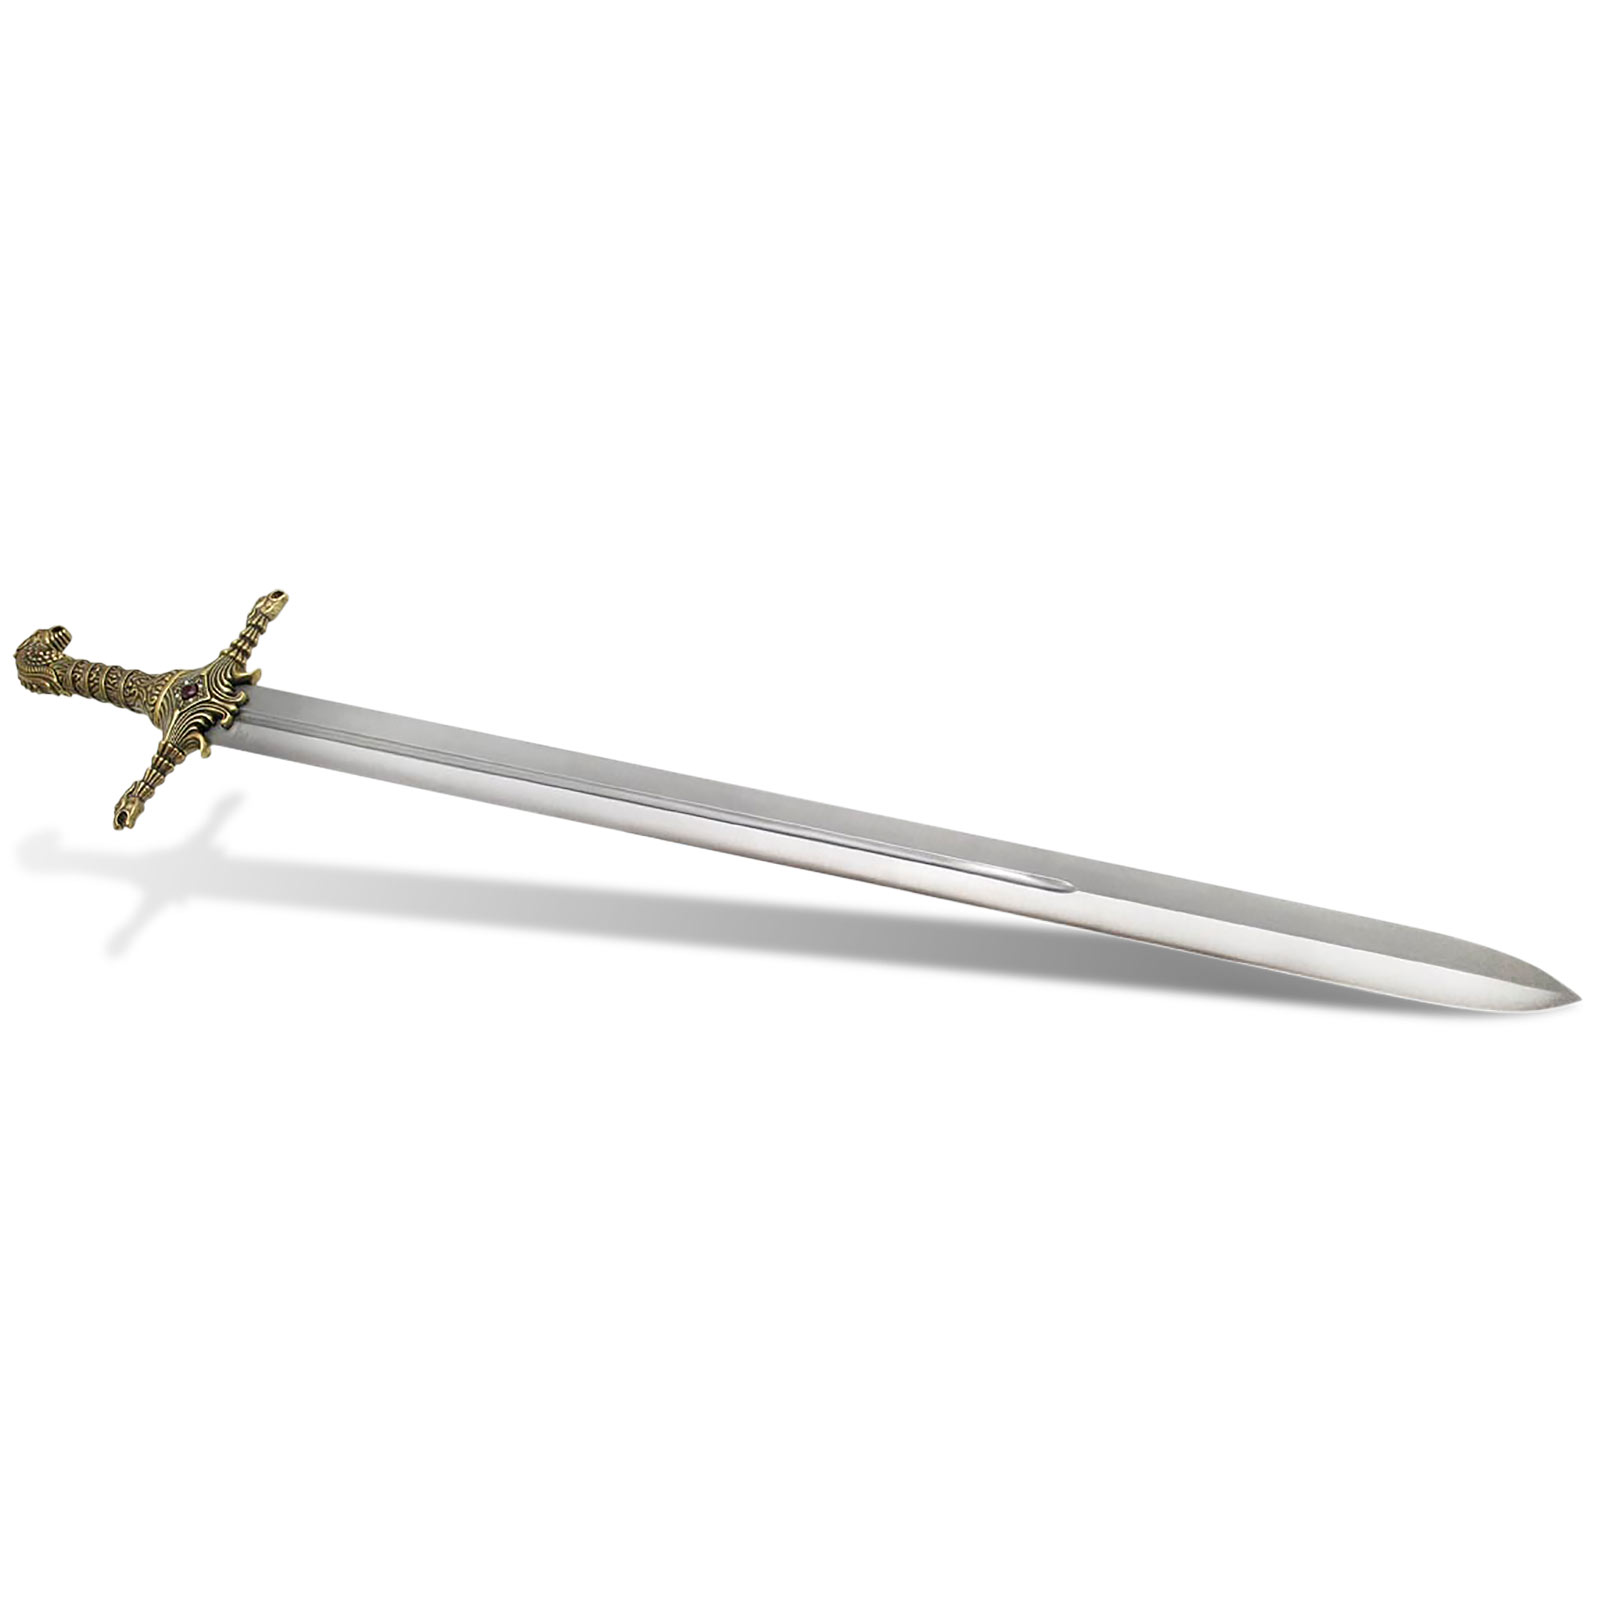 Game of Thrones - Brienne Of Tarth's Sword Oathkeeper